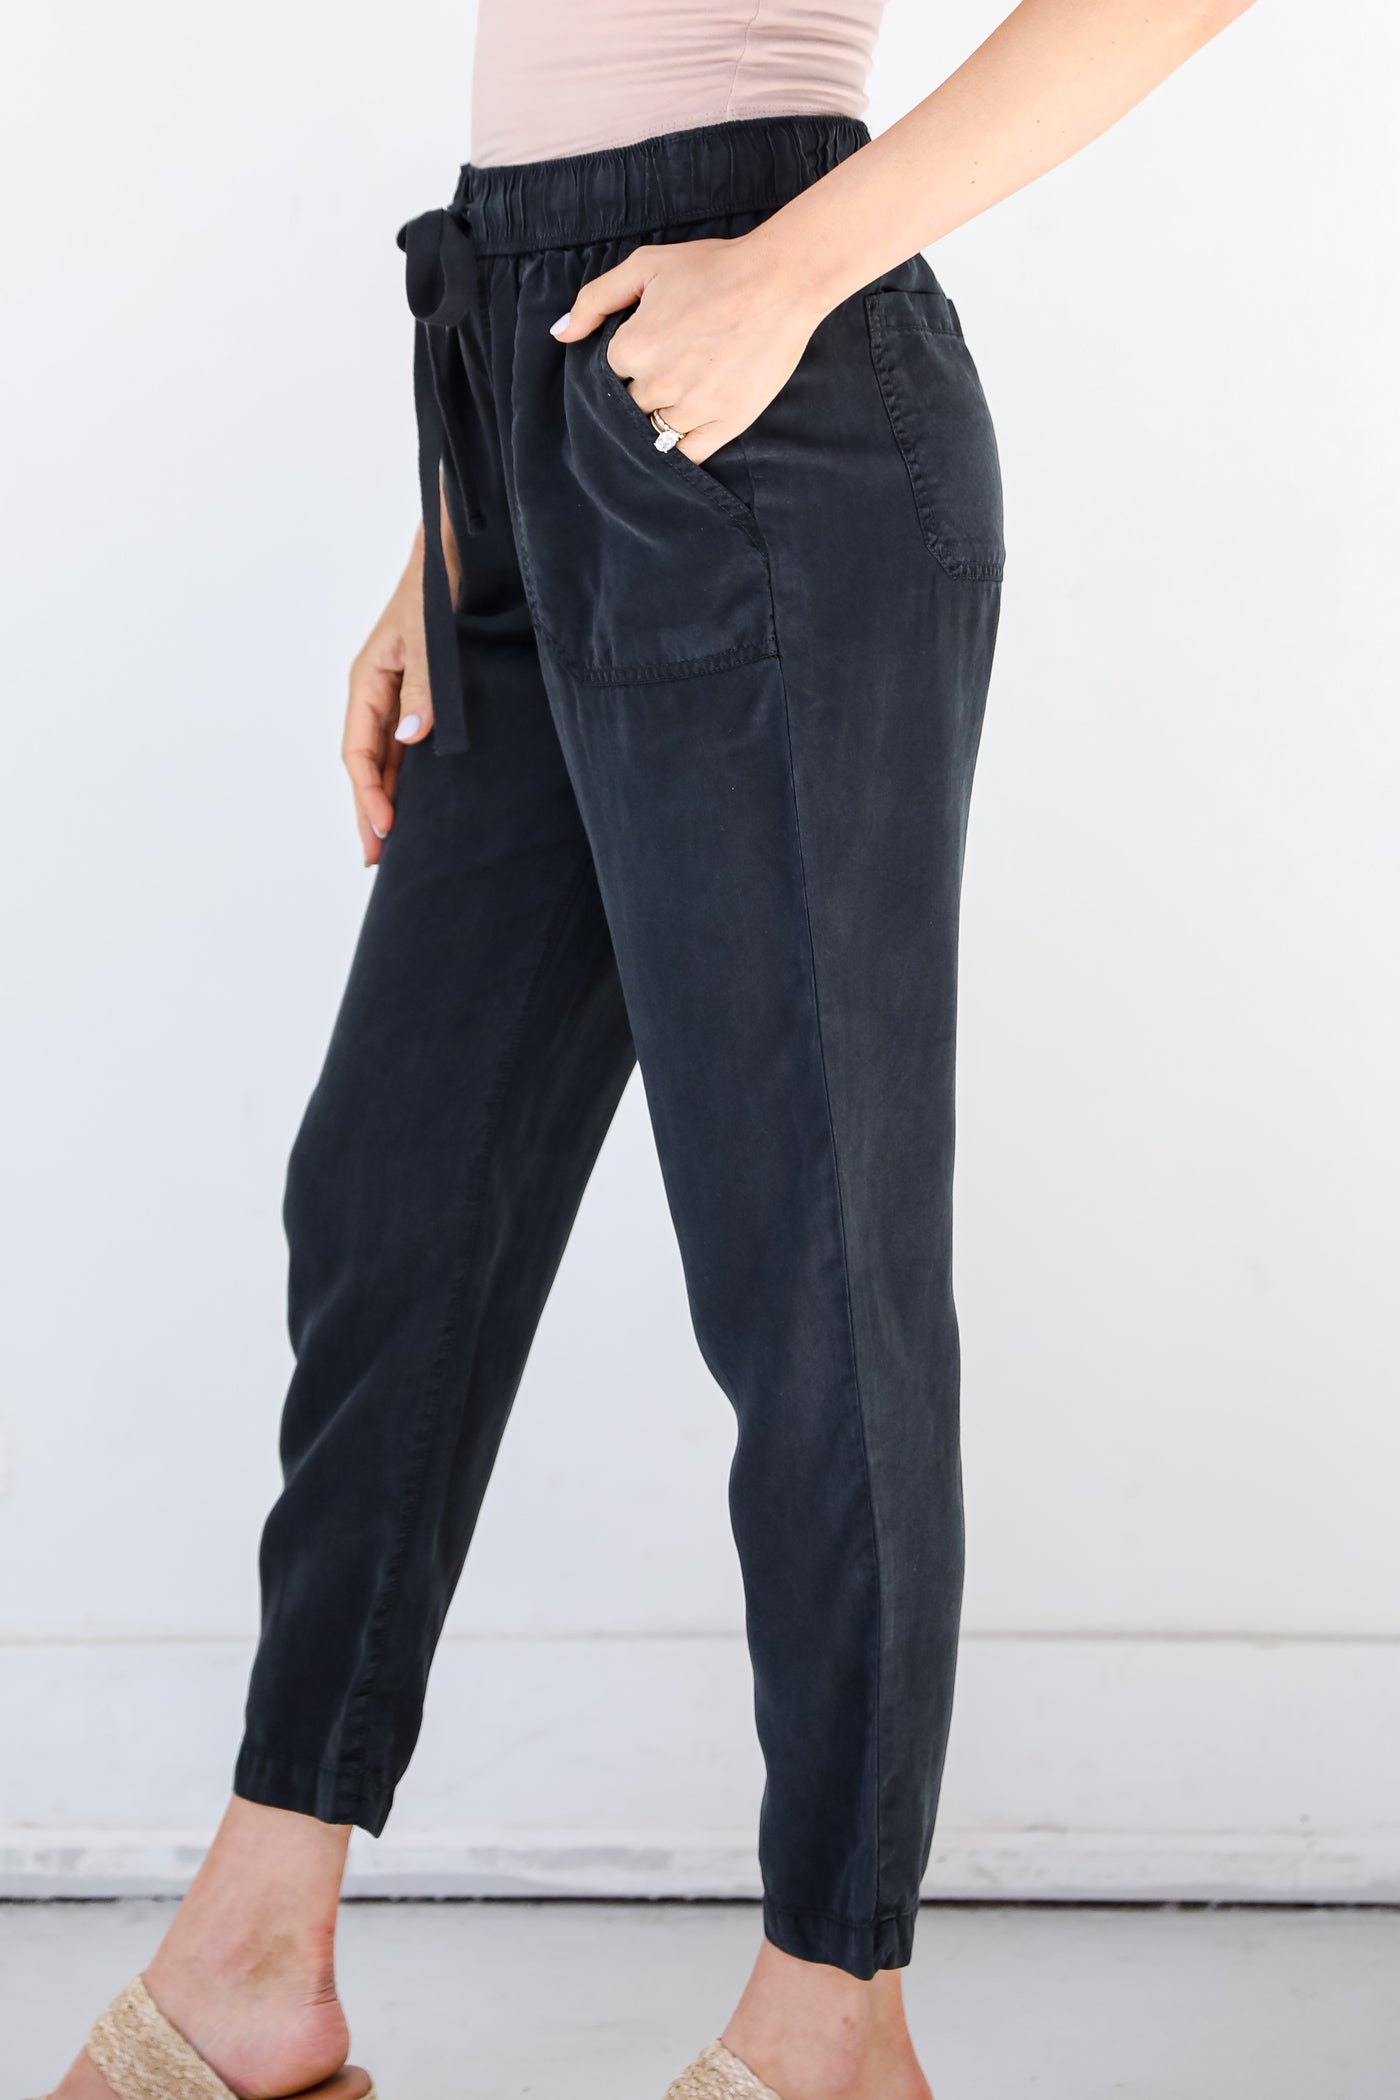 charcoal Pants side view